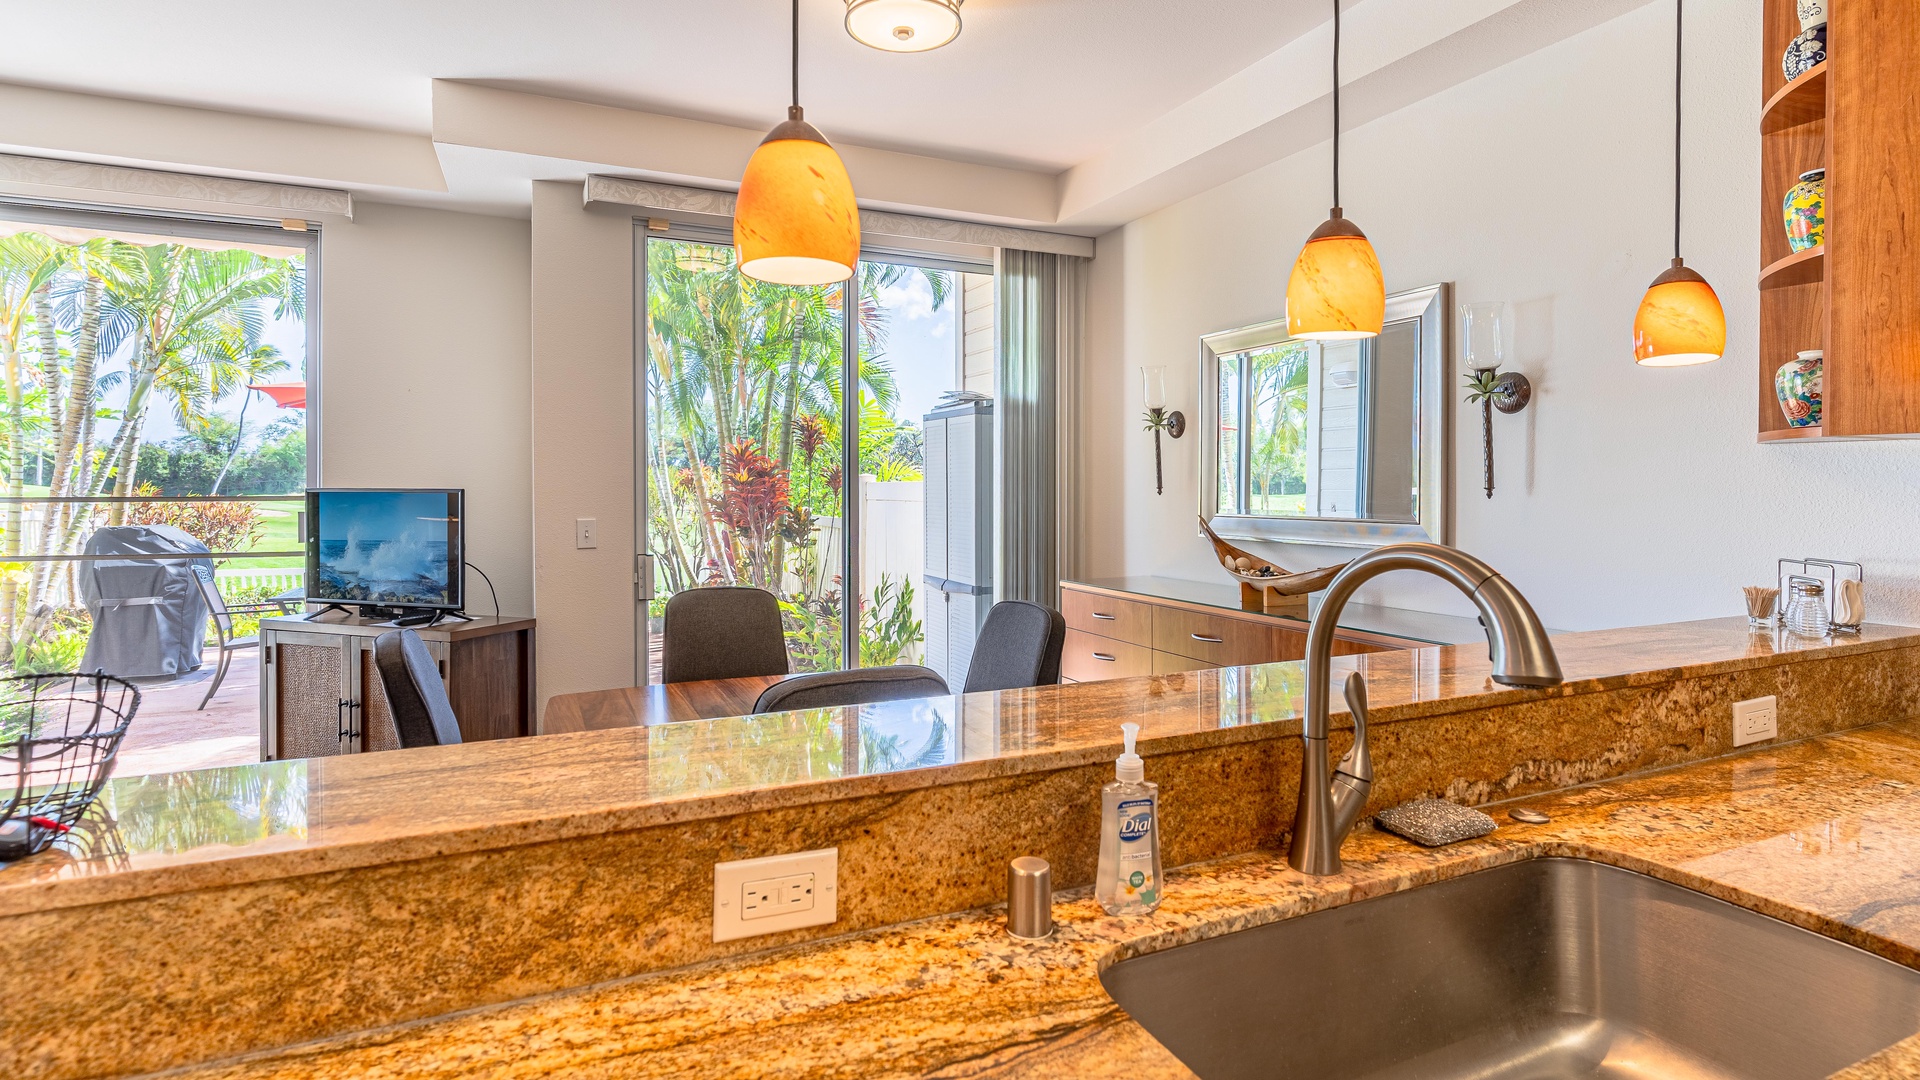 Kapolei Vacation Rentals, Fairways at Ko Olina 20G - Dine with a view and converse with the chef in an open floor plan.